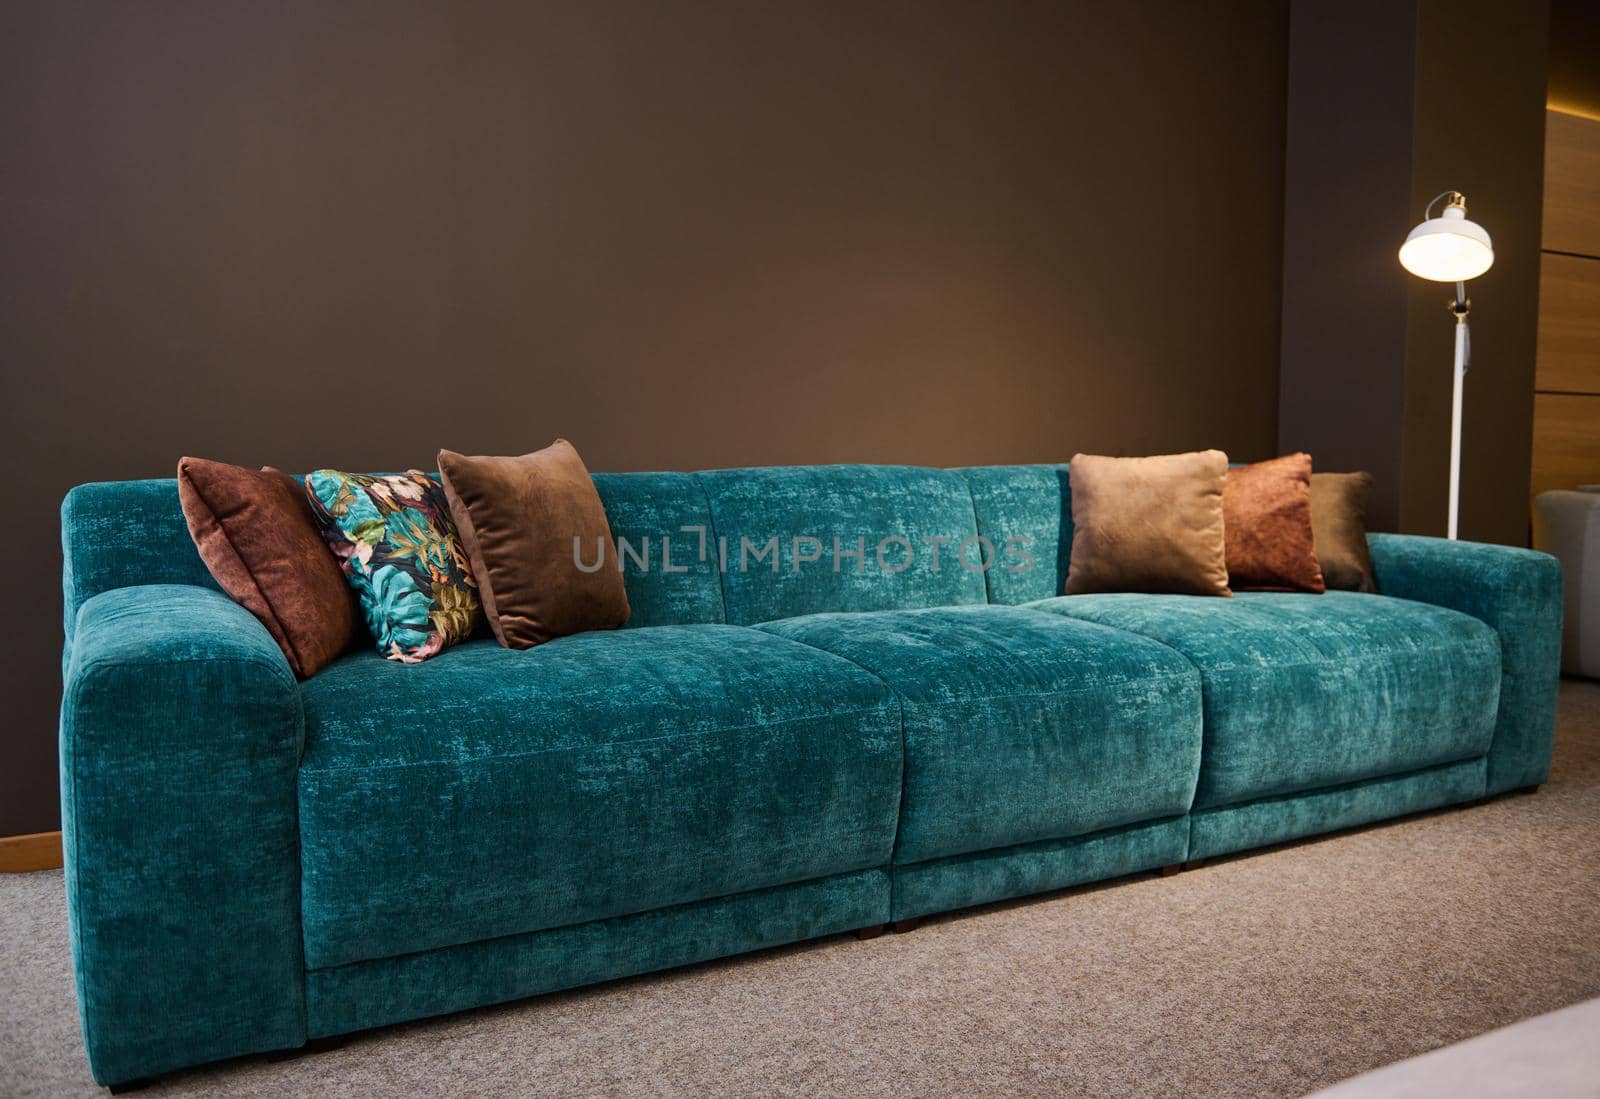 Exhibition of modern stylish upholstered furniture in the showroom of a furniture store. Focus on a turquoise soft velour sofa and brown pillows lit by a lamp against a brown wall background